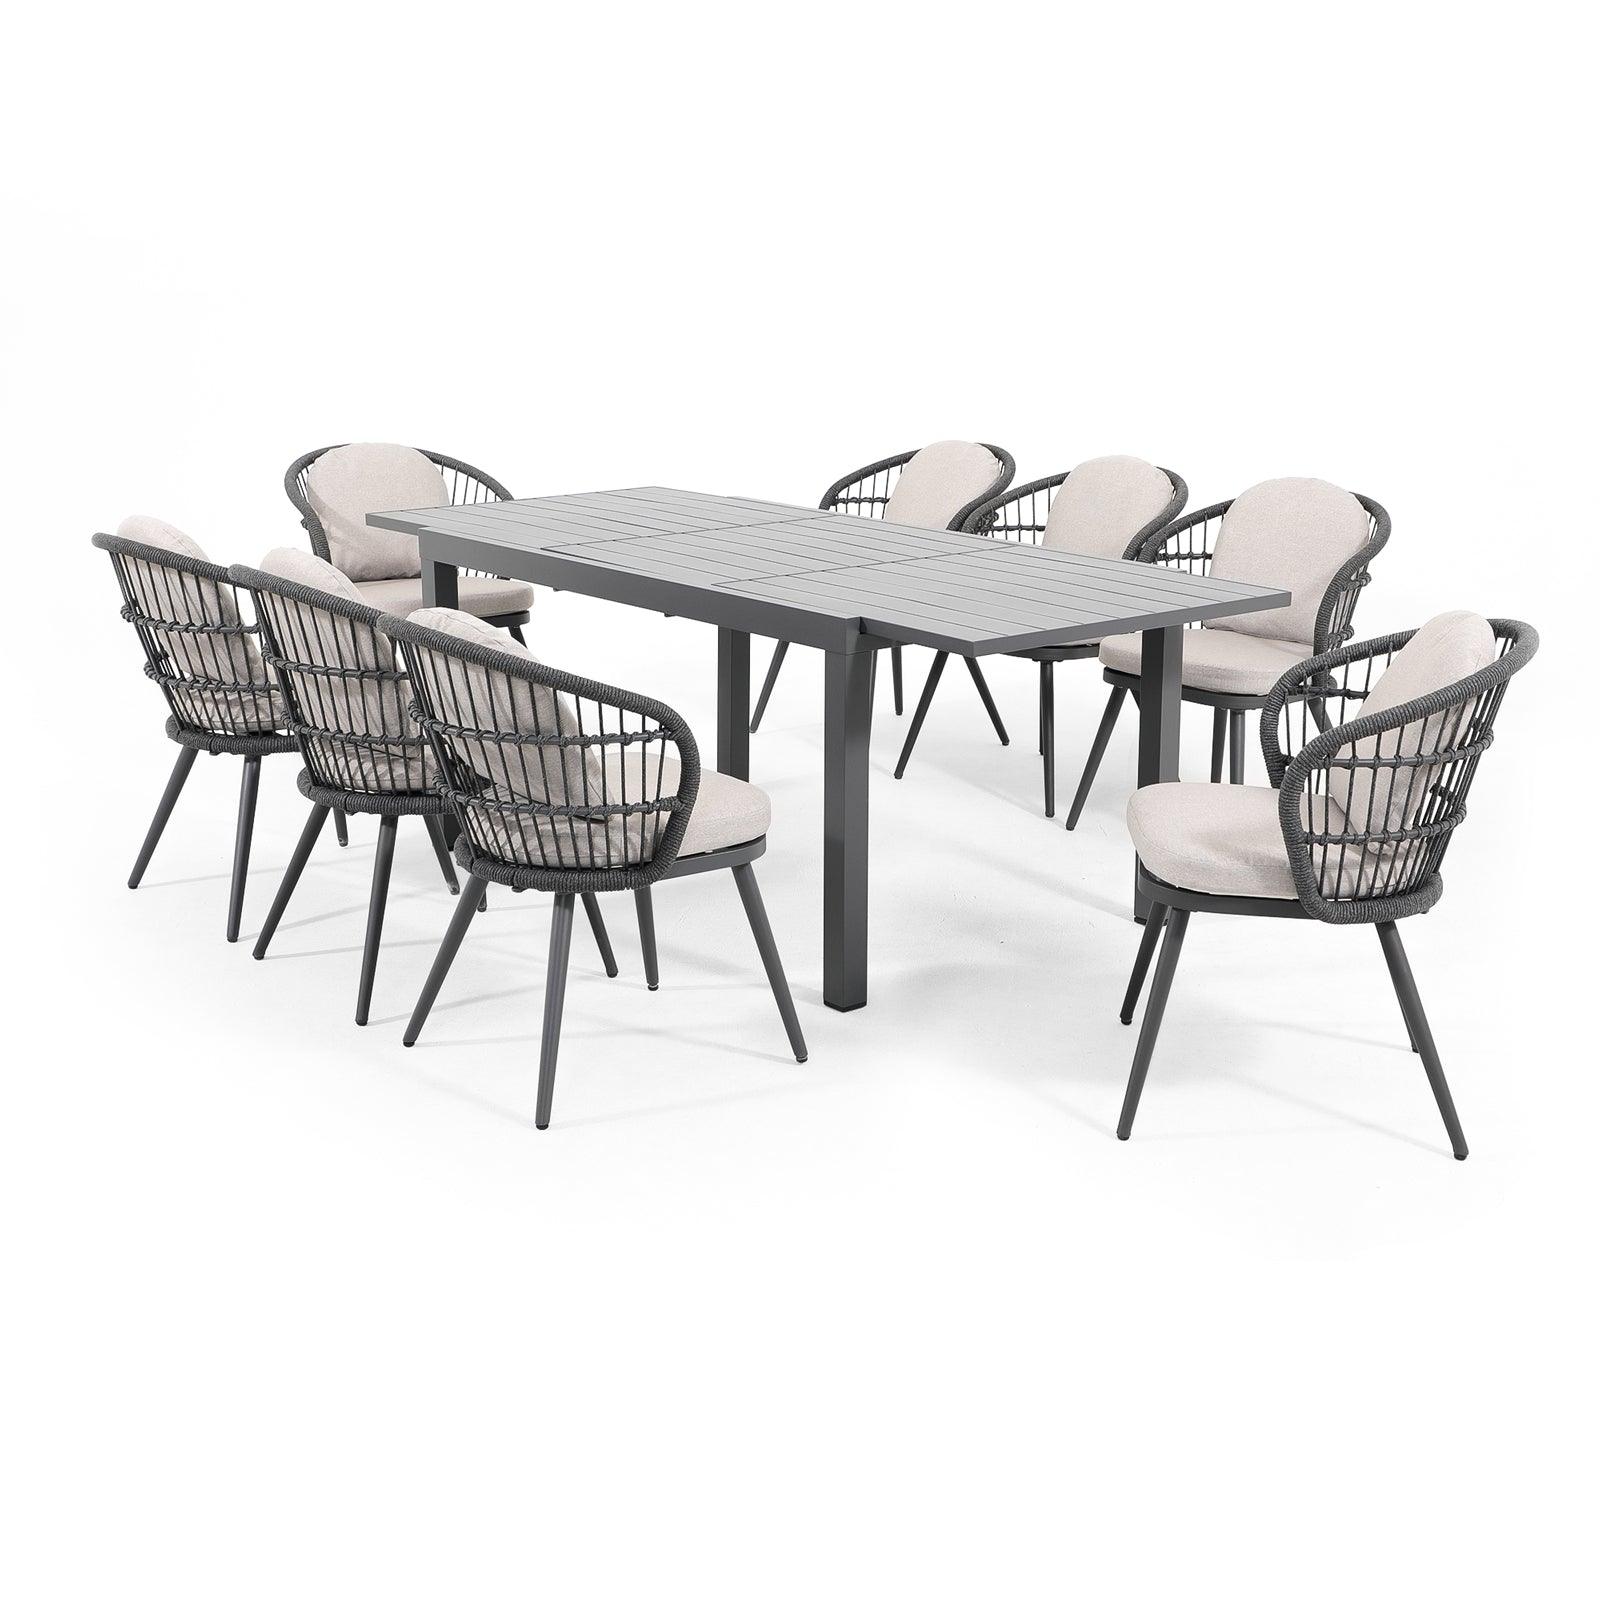 Comino Modern Rope Outdoor Furniture, dark grey aluminum frame outdoor Dining Set for 8 with light grey cushions, 8 dining seats with backrest rope design, 1 extendable rectangle aluminum dining table - Jardina Furniture#Pieces_9-pc.